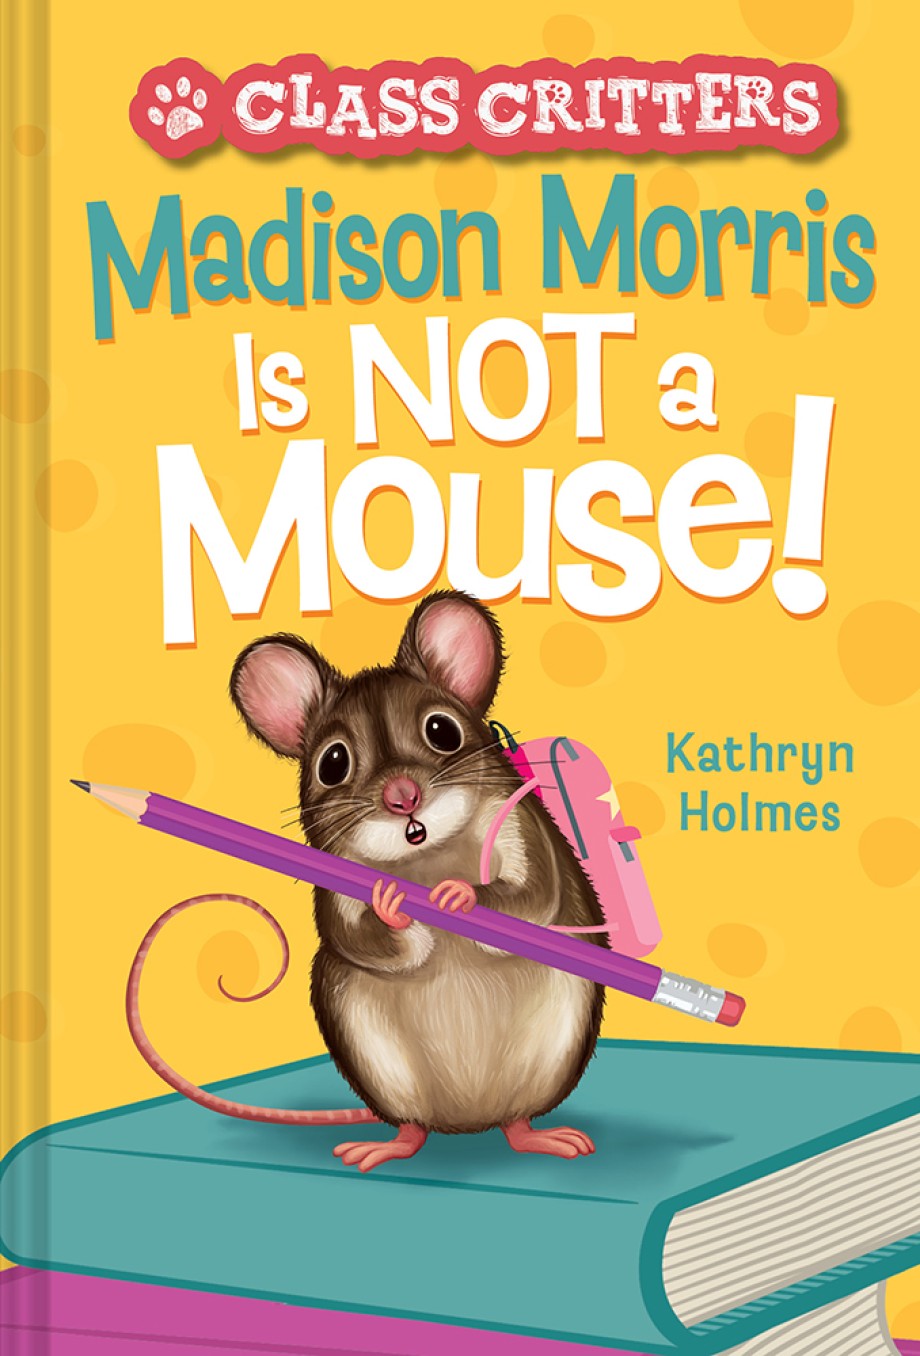 Madison Morris Is NOT a Mouse! (Class Critters #3)